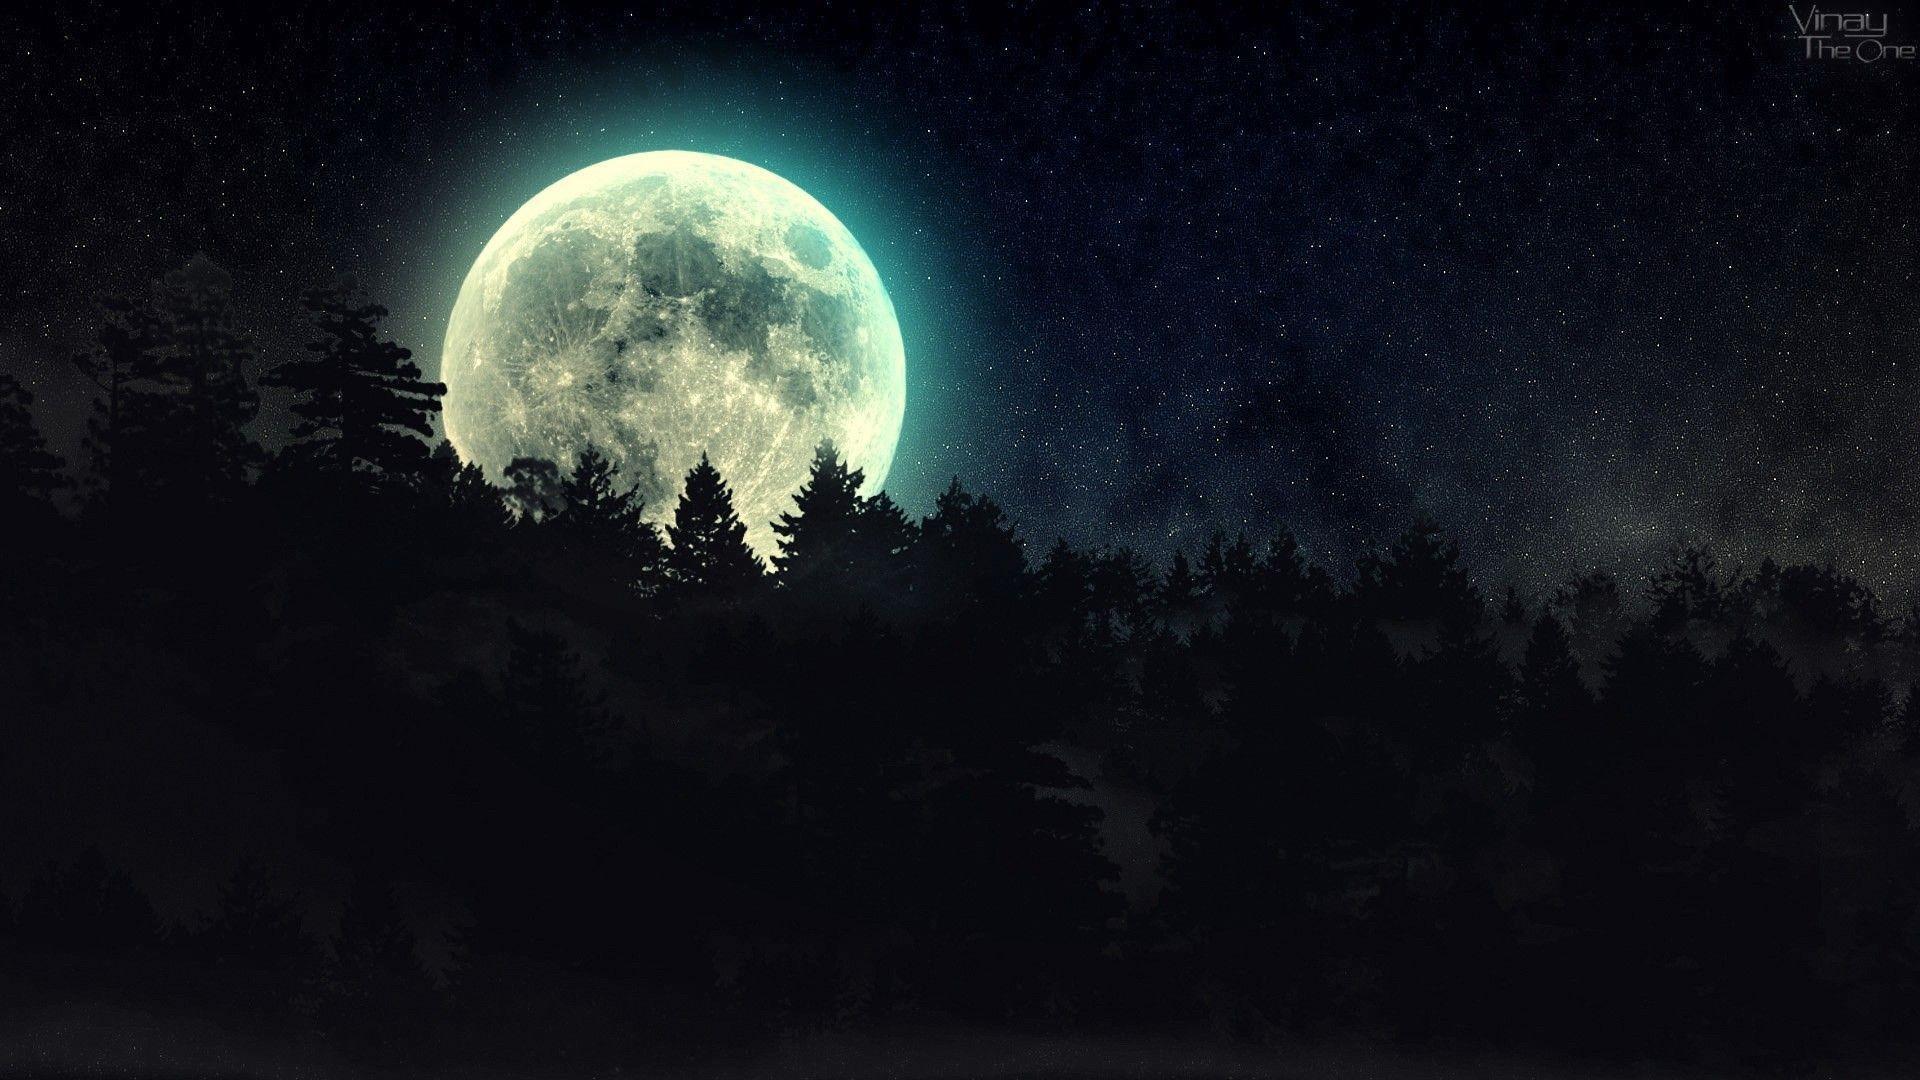 Dark Forest Wallpaper 1080p At Night With Moon, HD